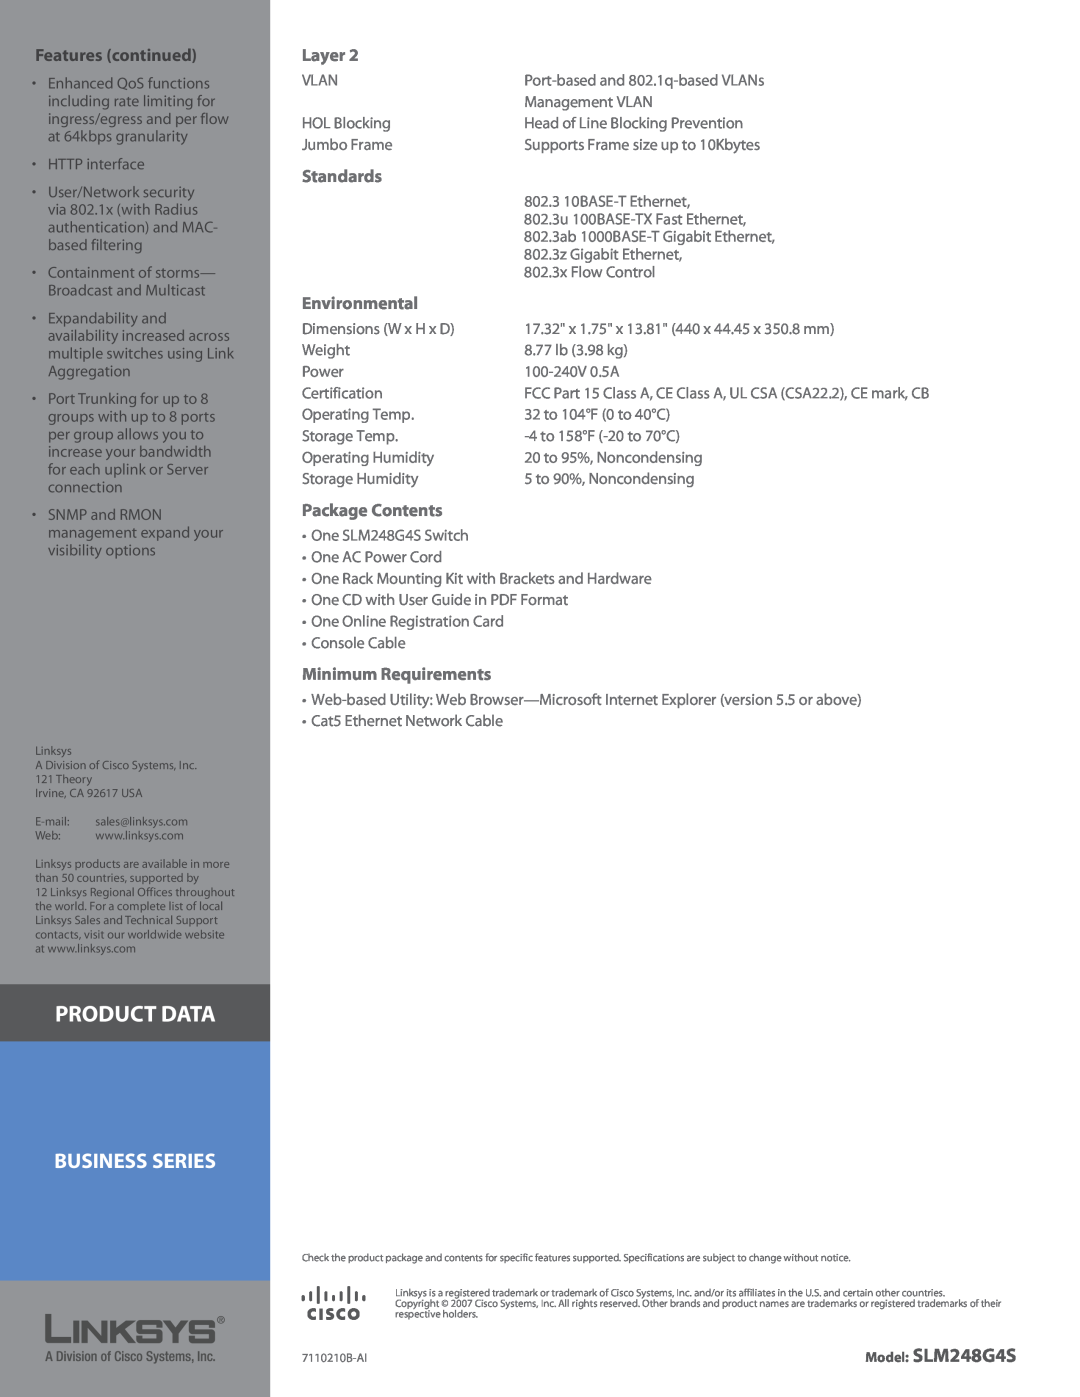 Linksys SLM248G4S manual Features continued, Layer, Standards, Environmental, Package Contents, Minimum Requirements 